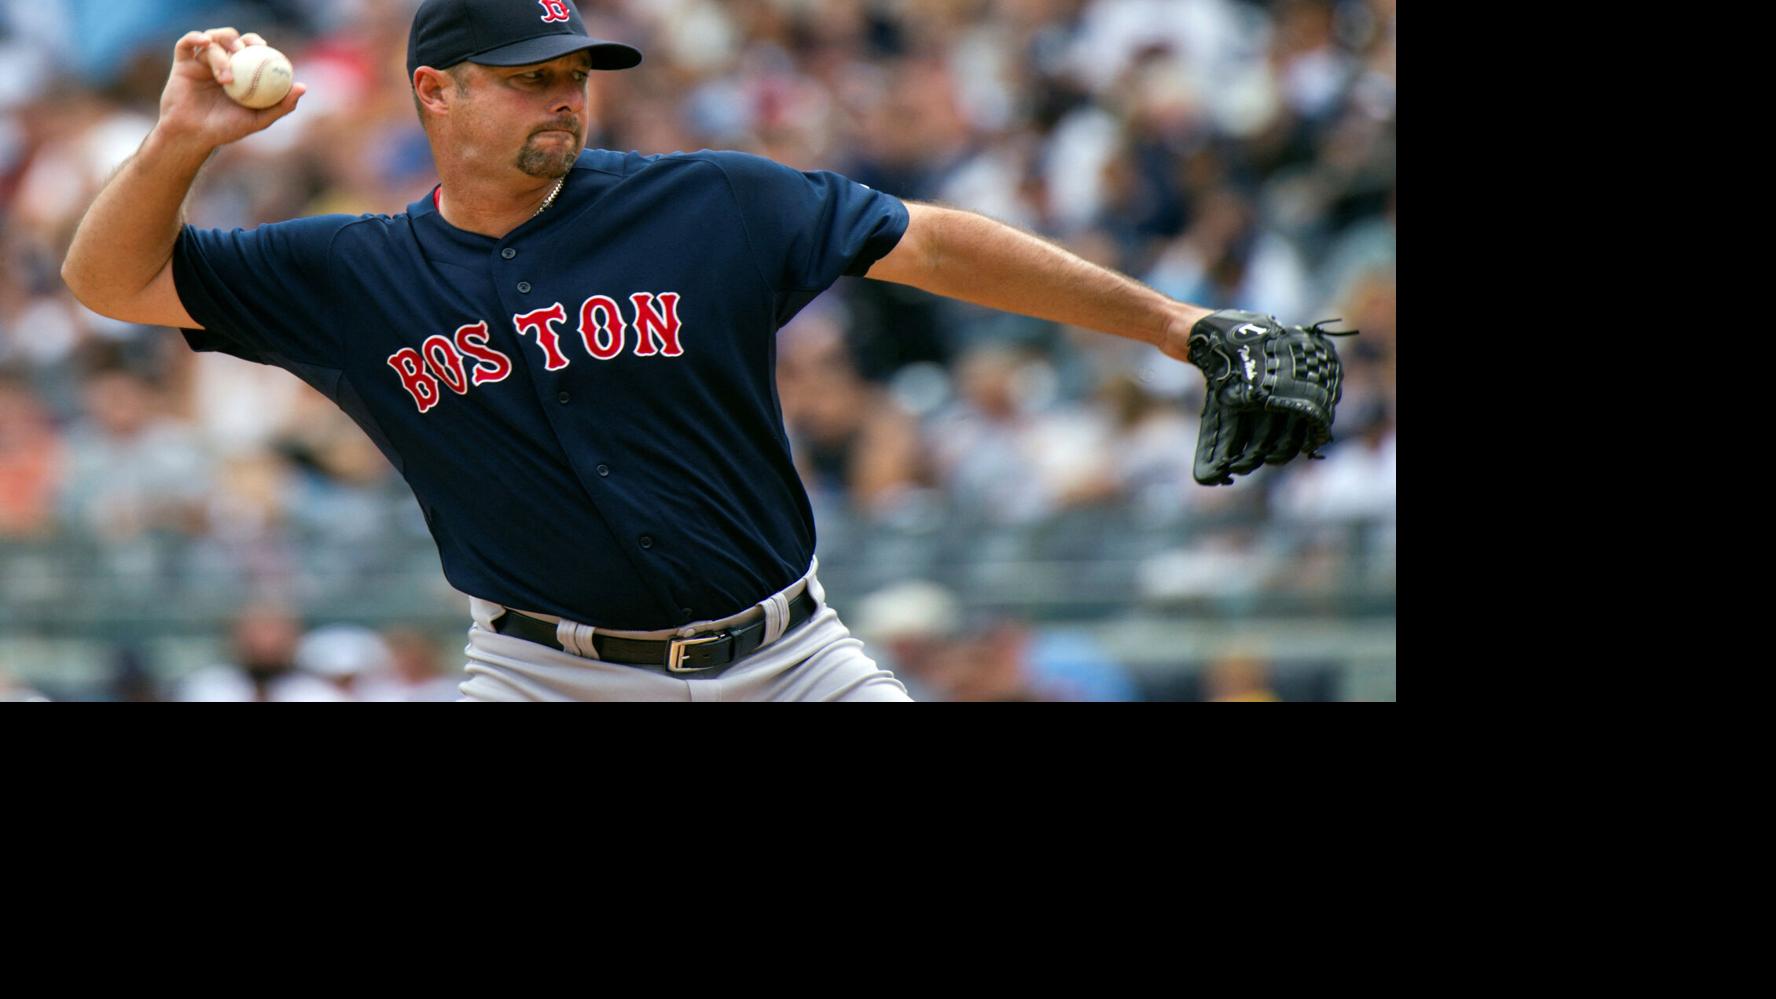 Longtime Red Sox pitcher Tim Wakefield dies at 57